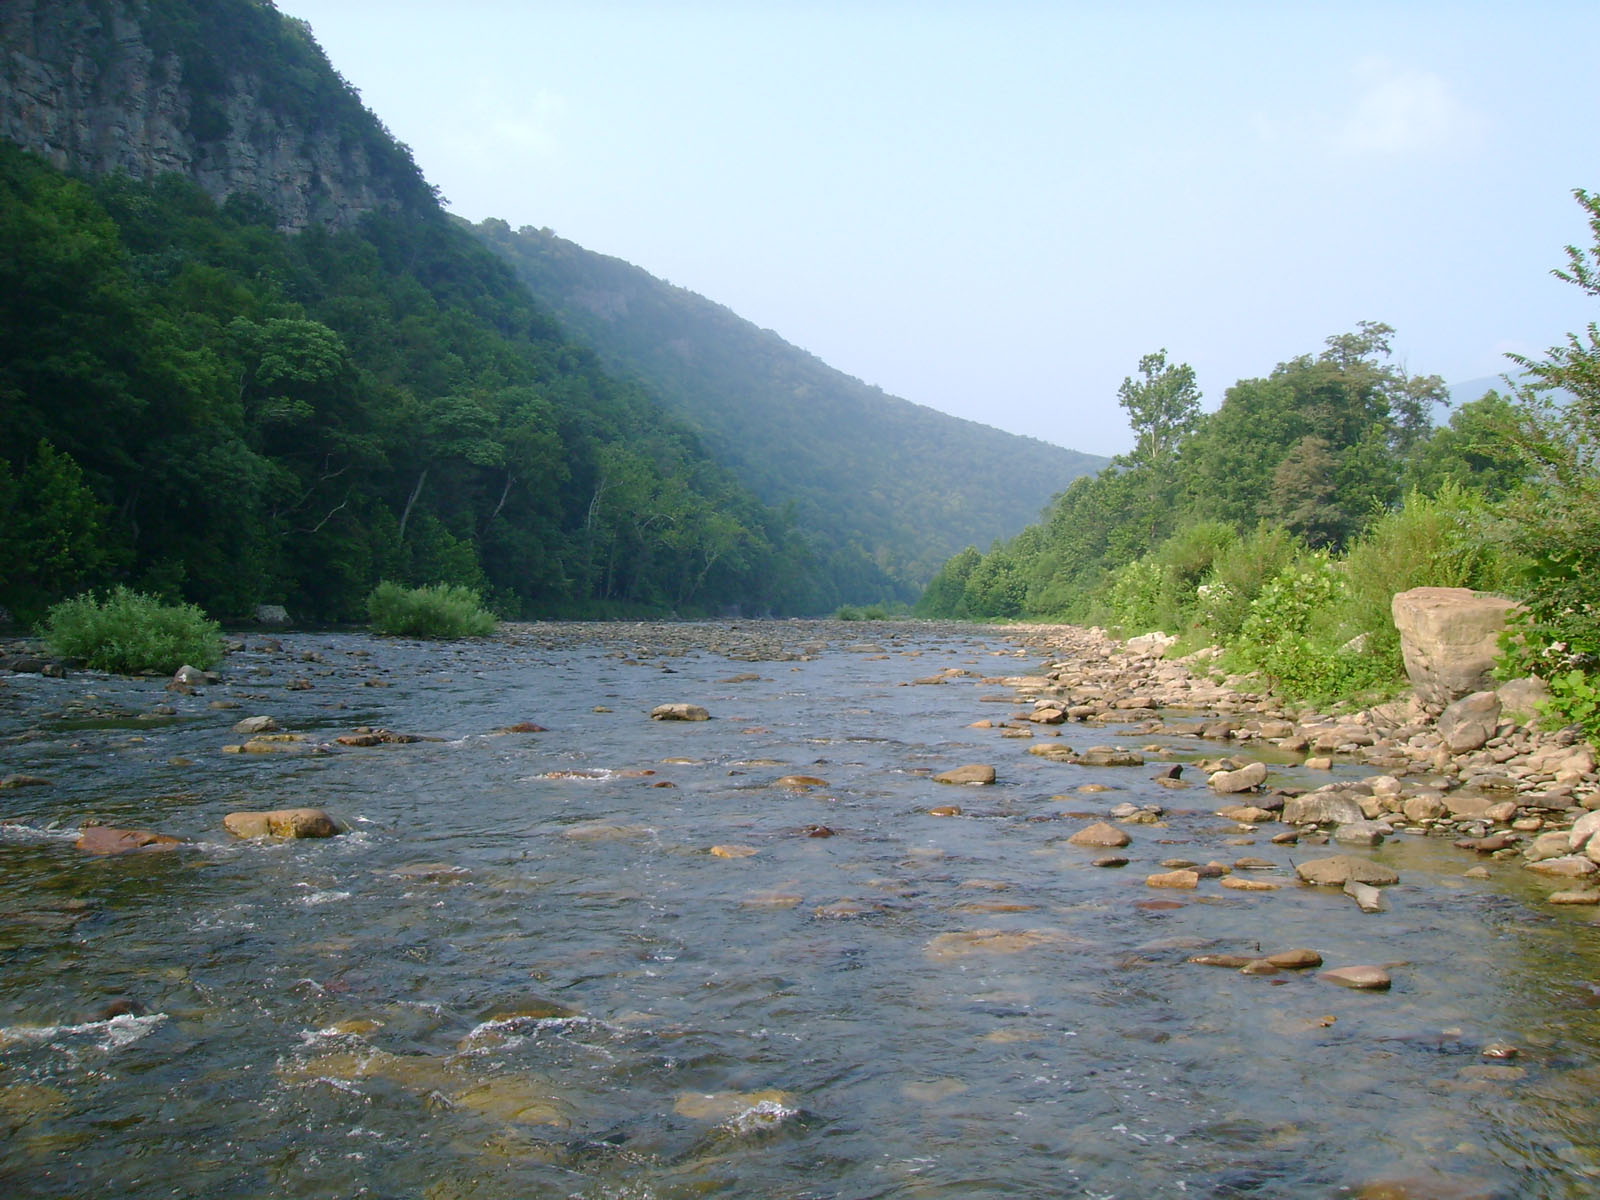 A river shoal with mountains in the background